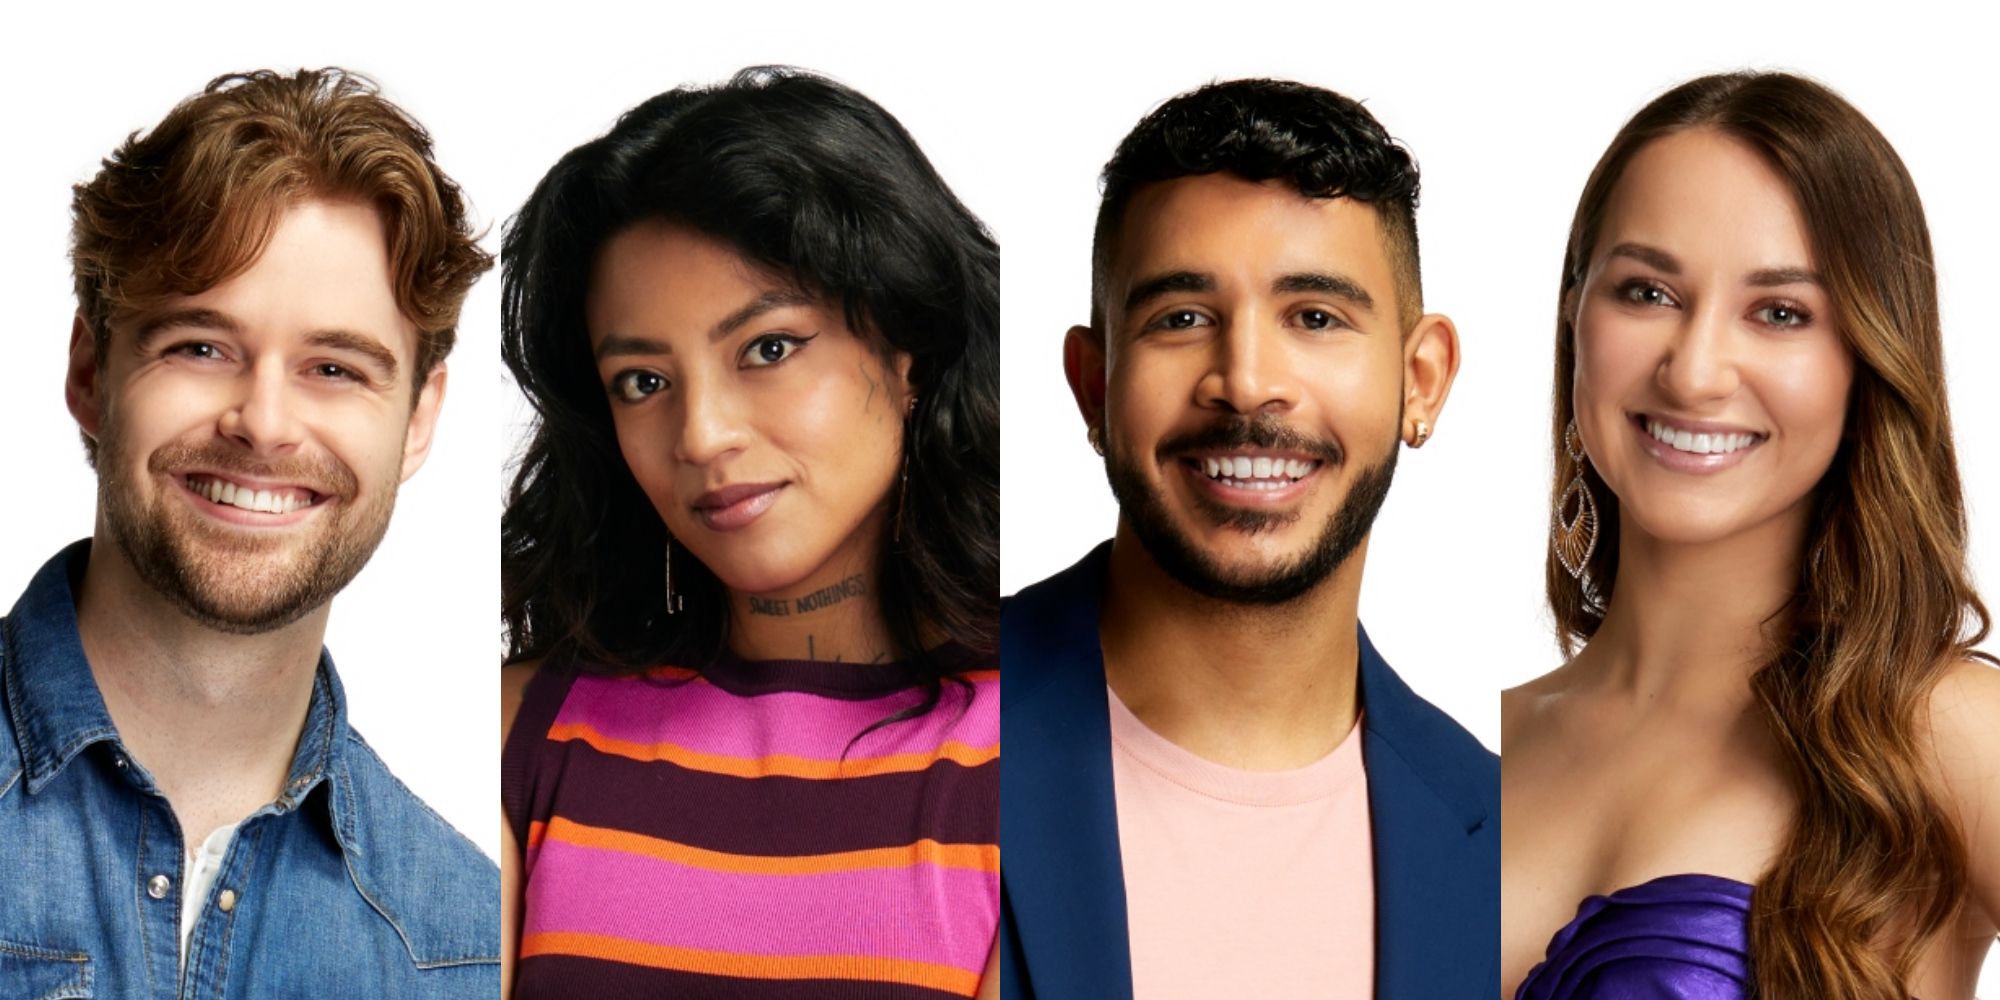 Kyle Moore, Melina Mansing, Josh Nash and Jacey Lynne on Big Brother Canada 10